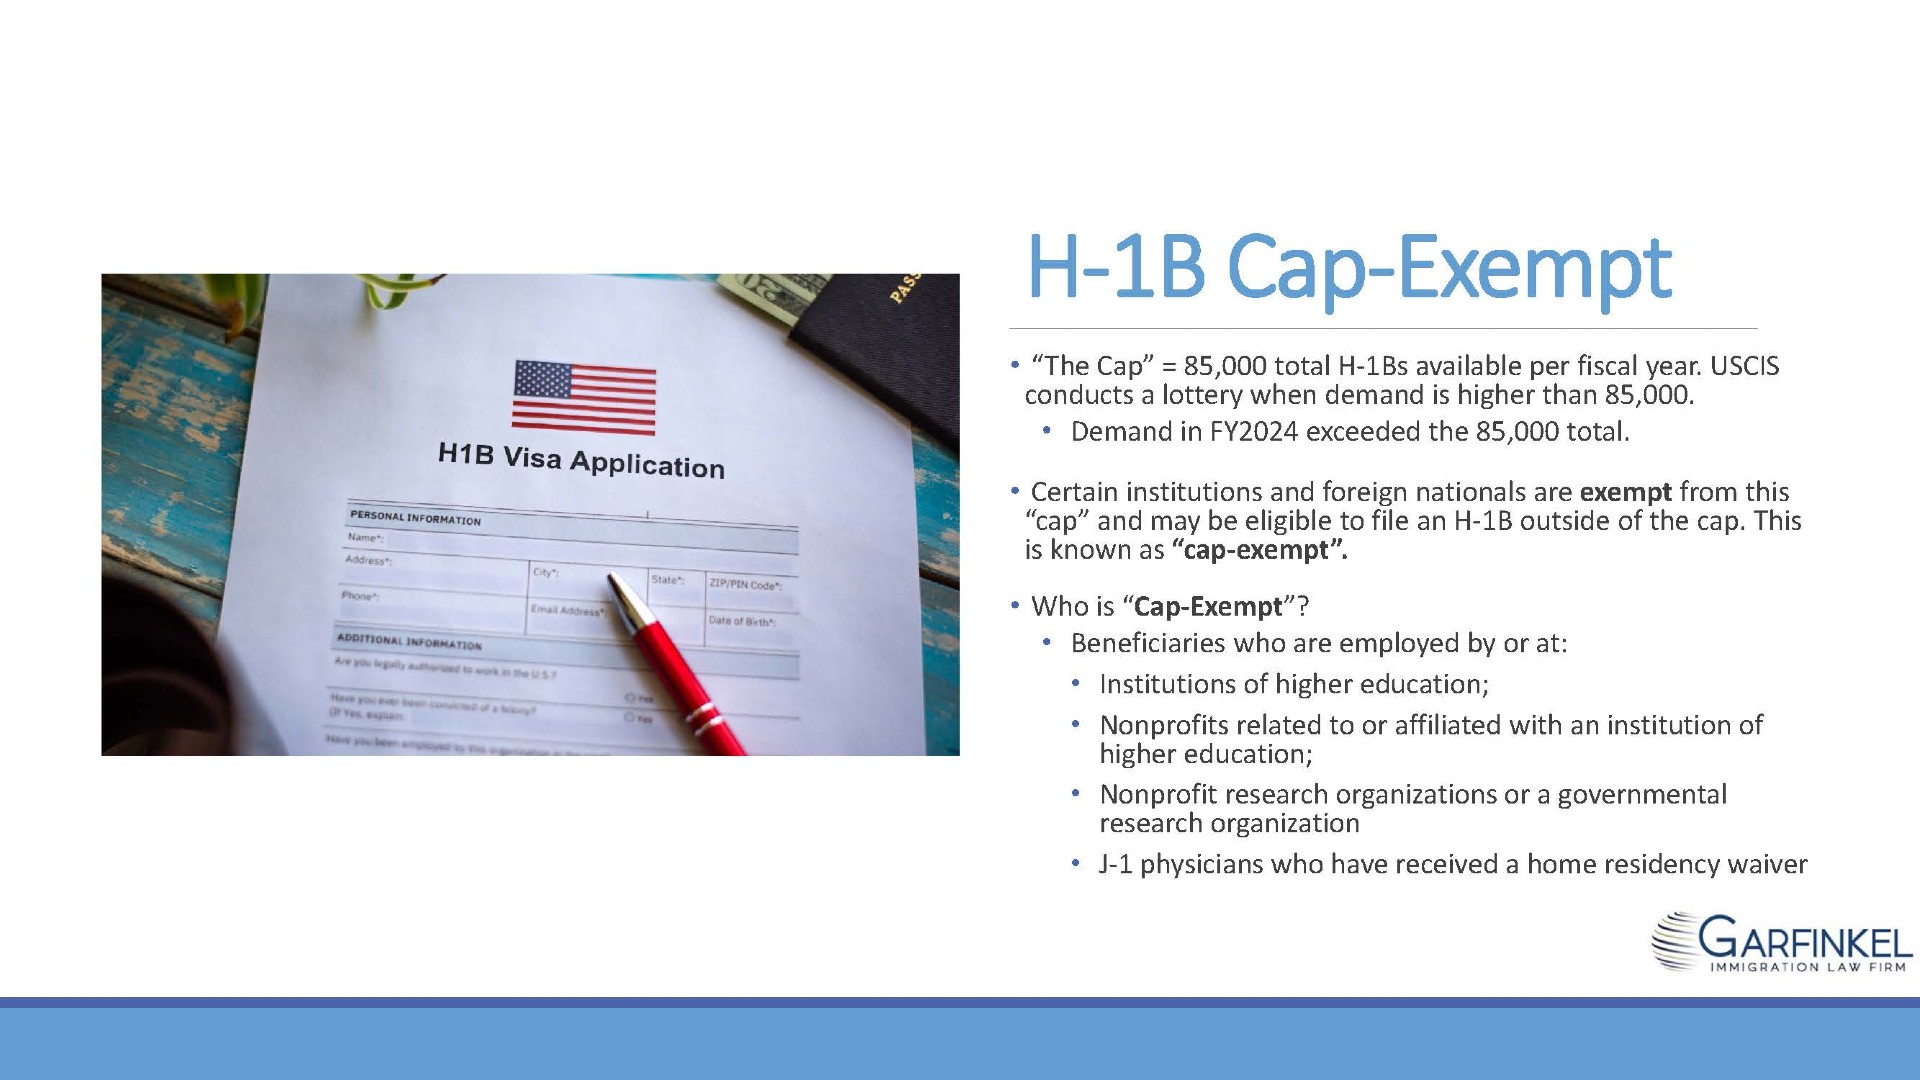 H-1B visa application. “The Cap” = 85,000 total H-1Bs available per fiscal year. USCIS conducts a lottery when demand is higher than 85,000. Demand in FY2024 exceeded the 85,000 total. Certain institutions and foreign nationals are exempt from this “cap” and may be eligible to file an H-1B outside of the cap. This is known as “cap-exempt”.

Who is “Cap-Exempt”? Beneficiaries who are employed by or at. Institutions of higher education; Nonprofits related to or affiliated with an institution of higher education; Nonprofit research organizations or a governmental research organization; J-1 physicians who have received a home residency waiver.
